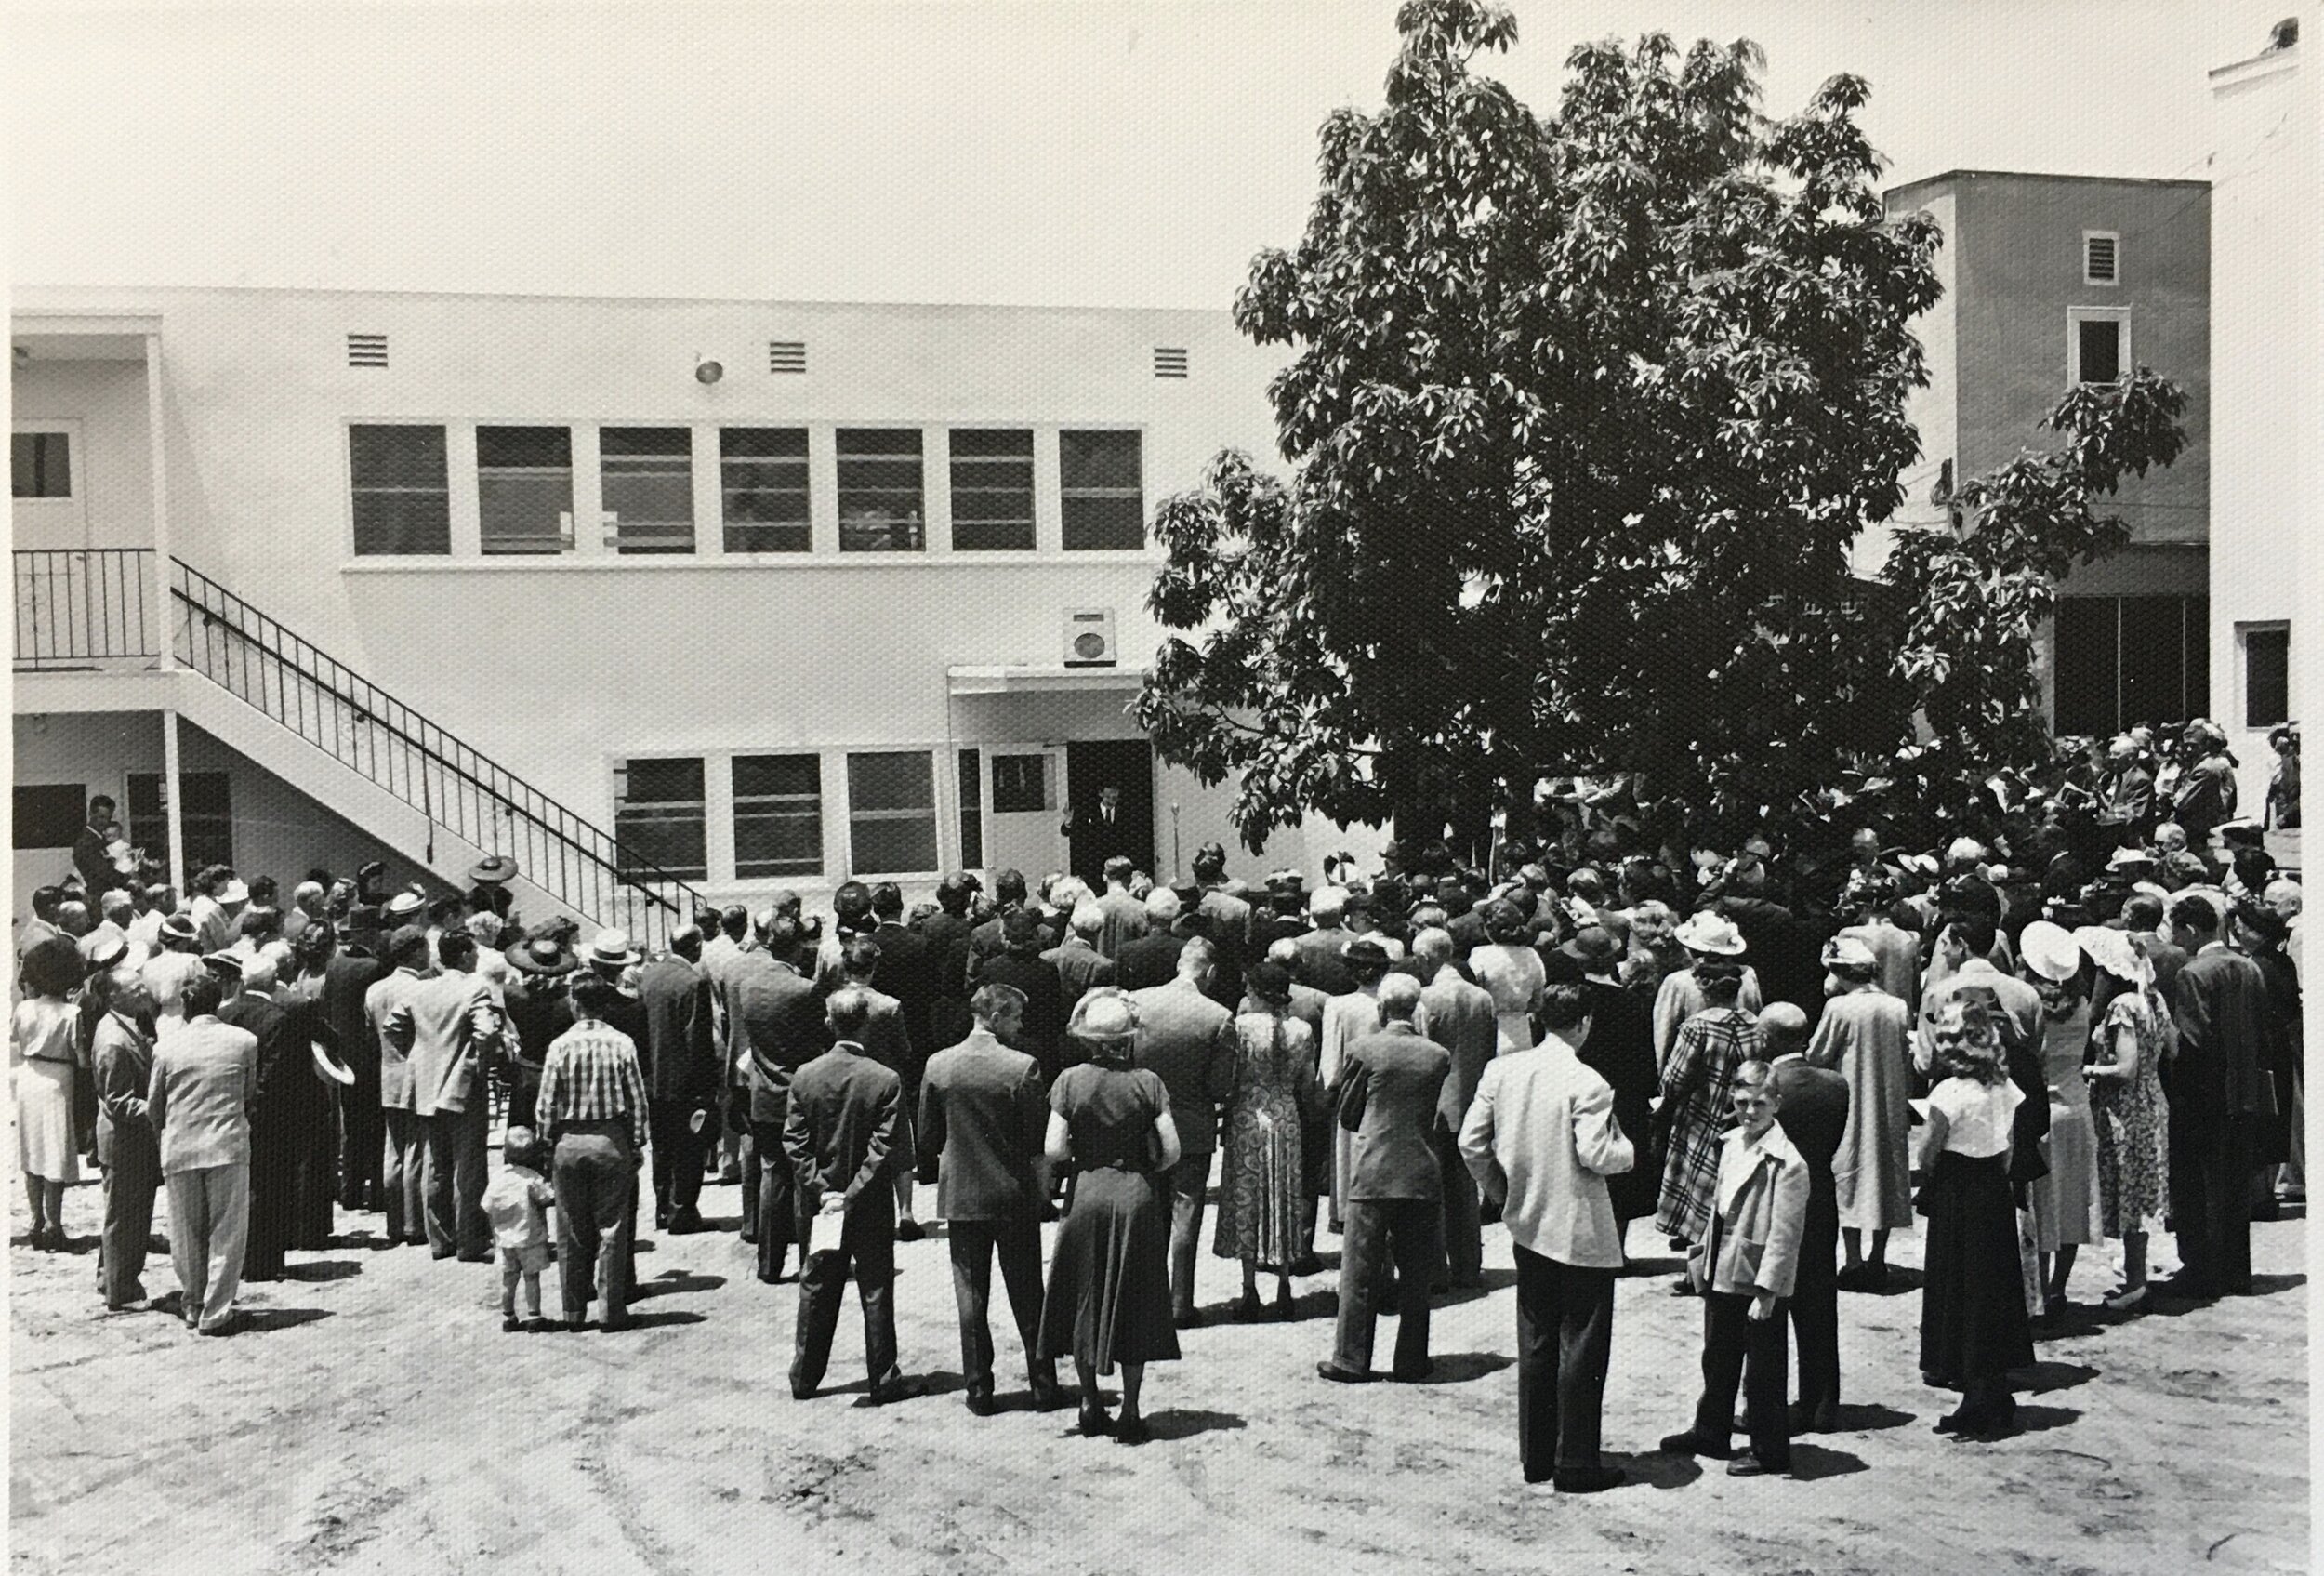 Dedication of the completed "Sunshine Hall"